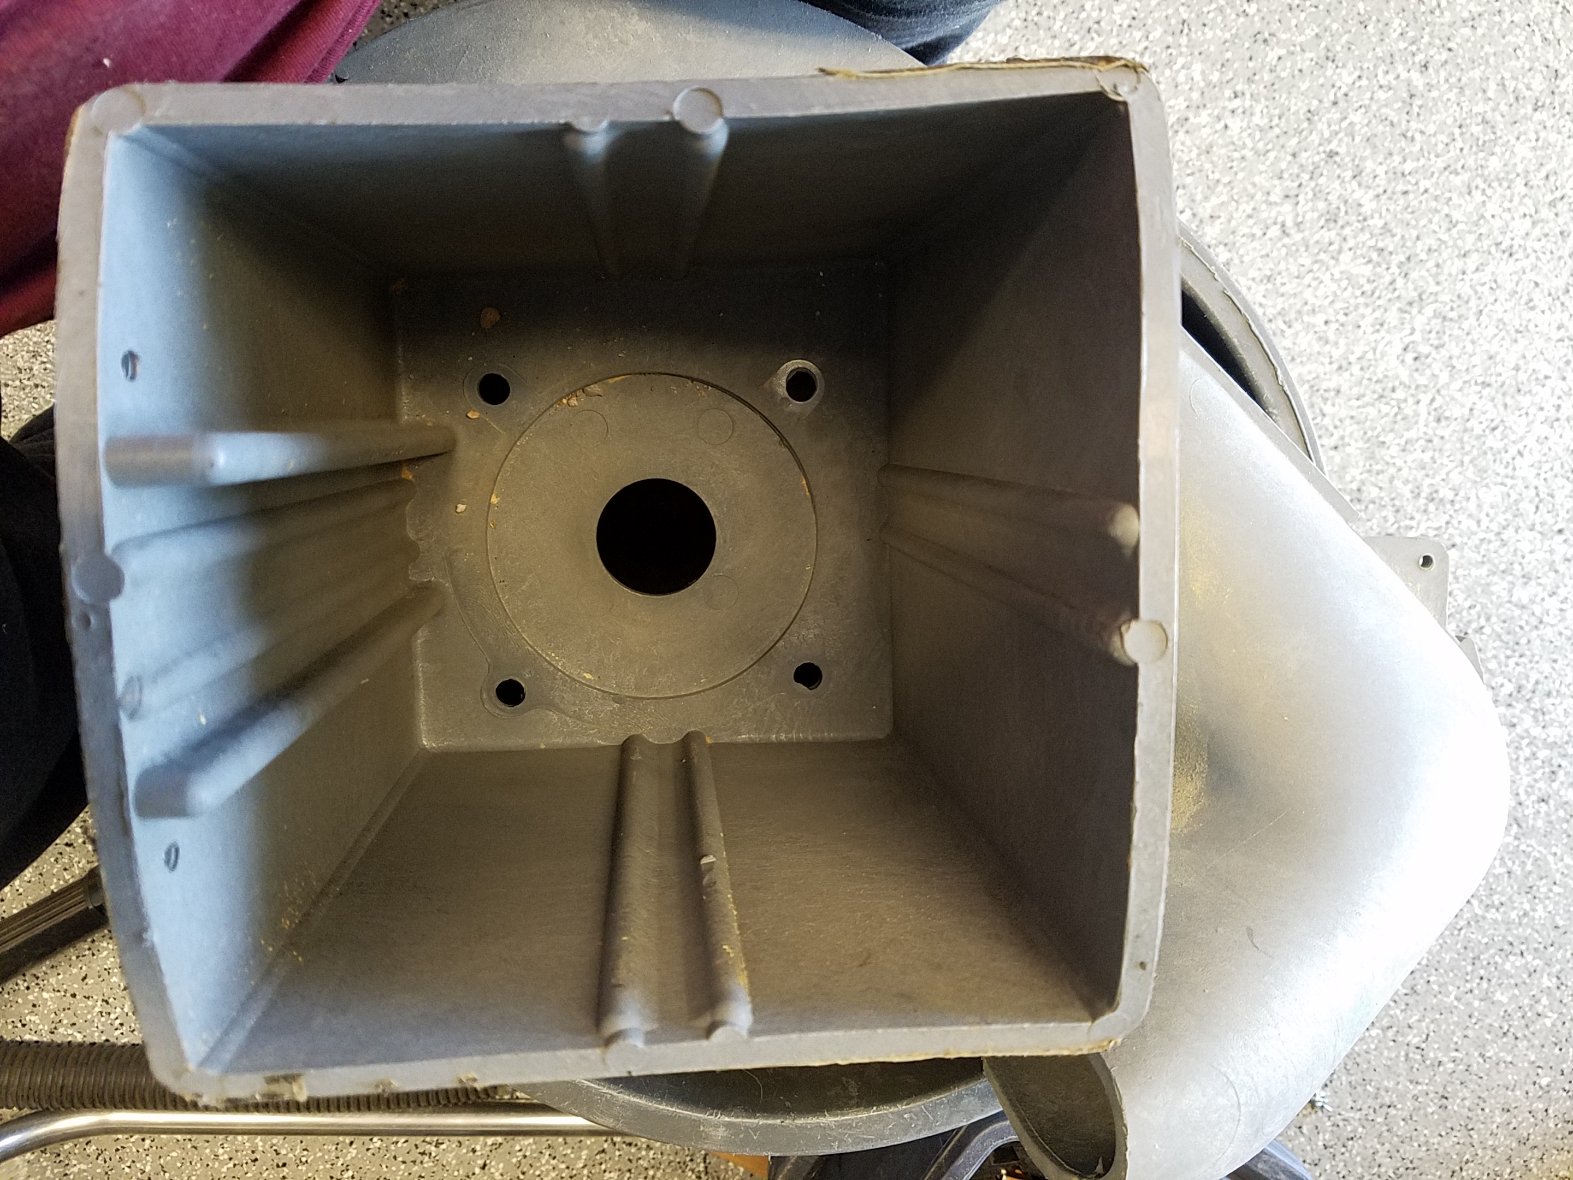 The DC3300 Motor Housing and part of the Fan Housing